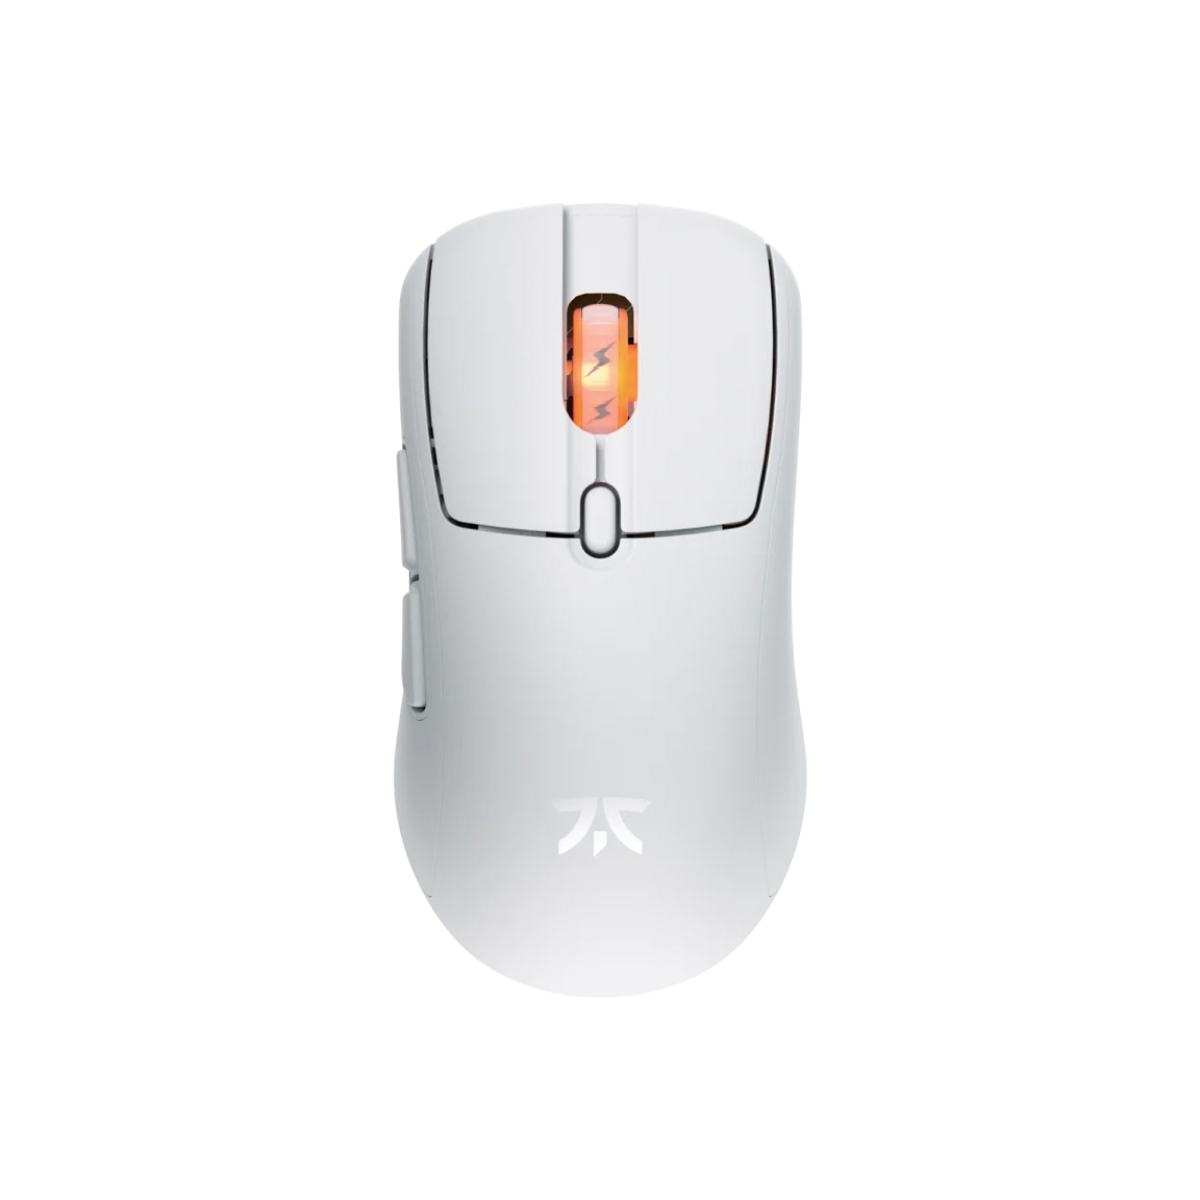 Fnatic Bolt Wireless RGB Optical Gaming Mouse - White (MS0003-002)